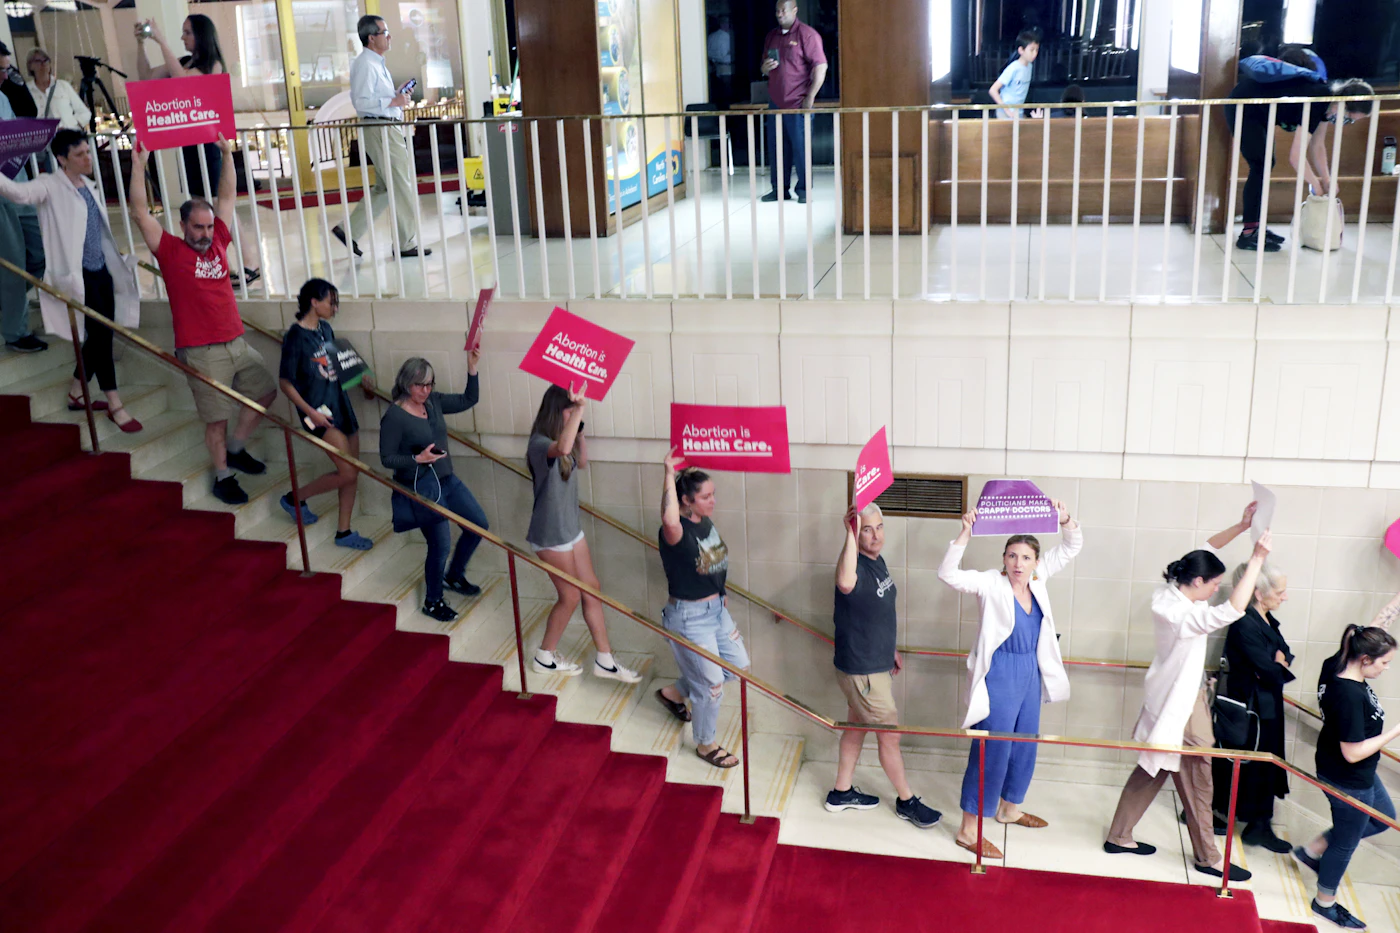 Abortion rights protesters were removed from the House gallery for shouting at lawmakers after they overrode Gov. Roy Cooper's veto of the abortion bill on Tuesday, May 16. (AP Photo/Chris Seward)